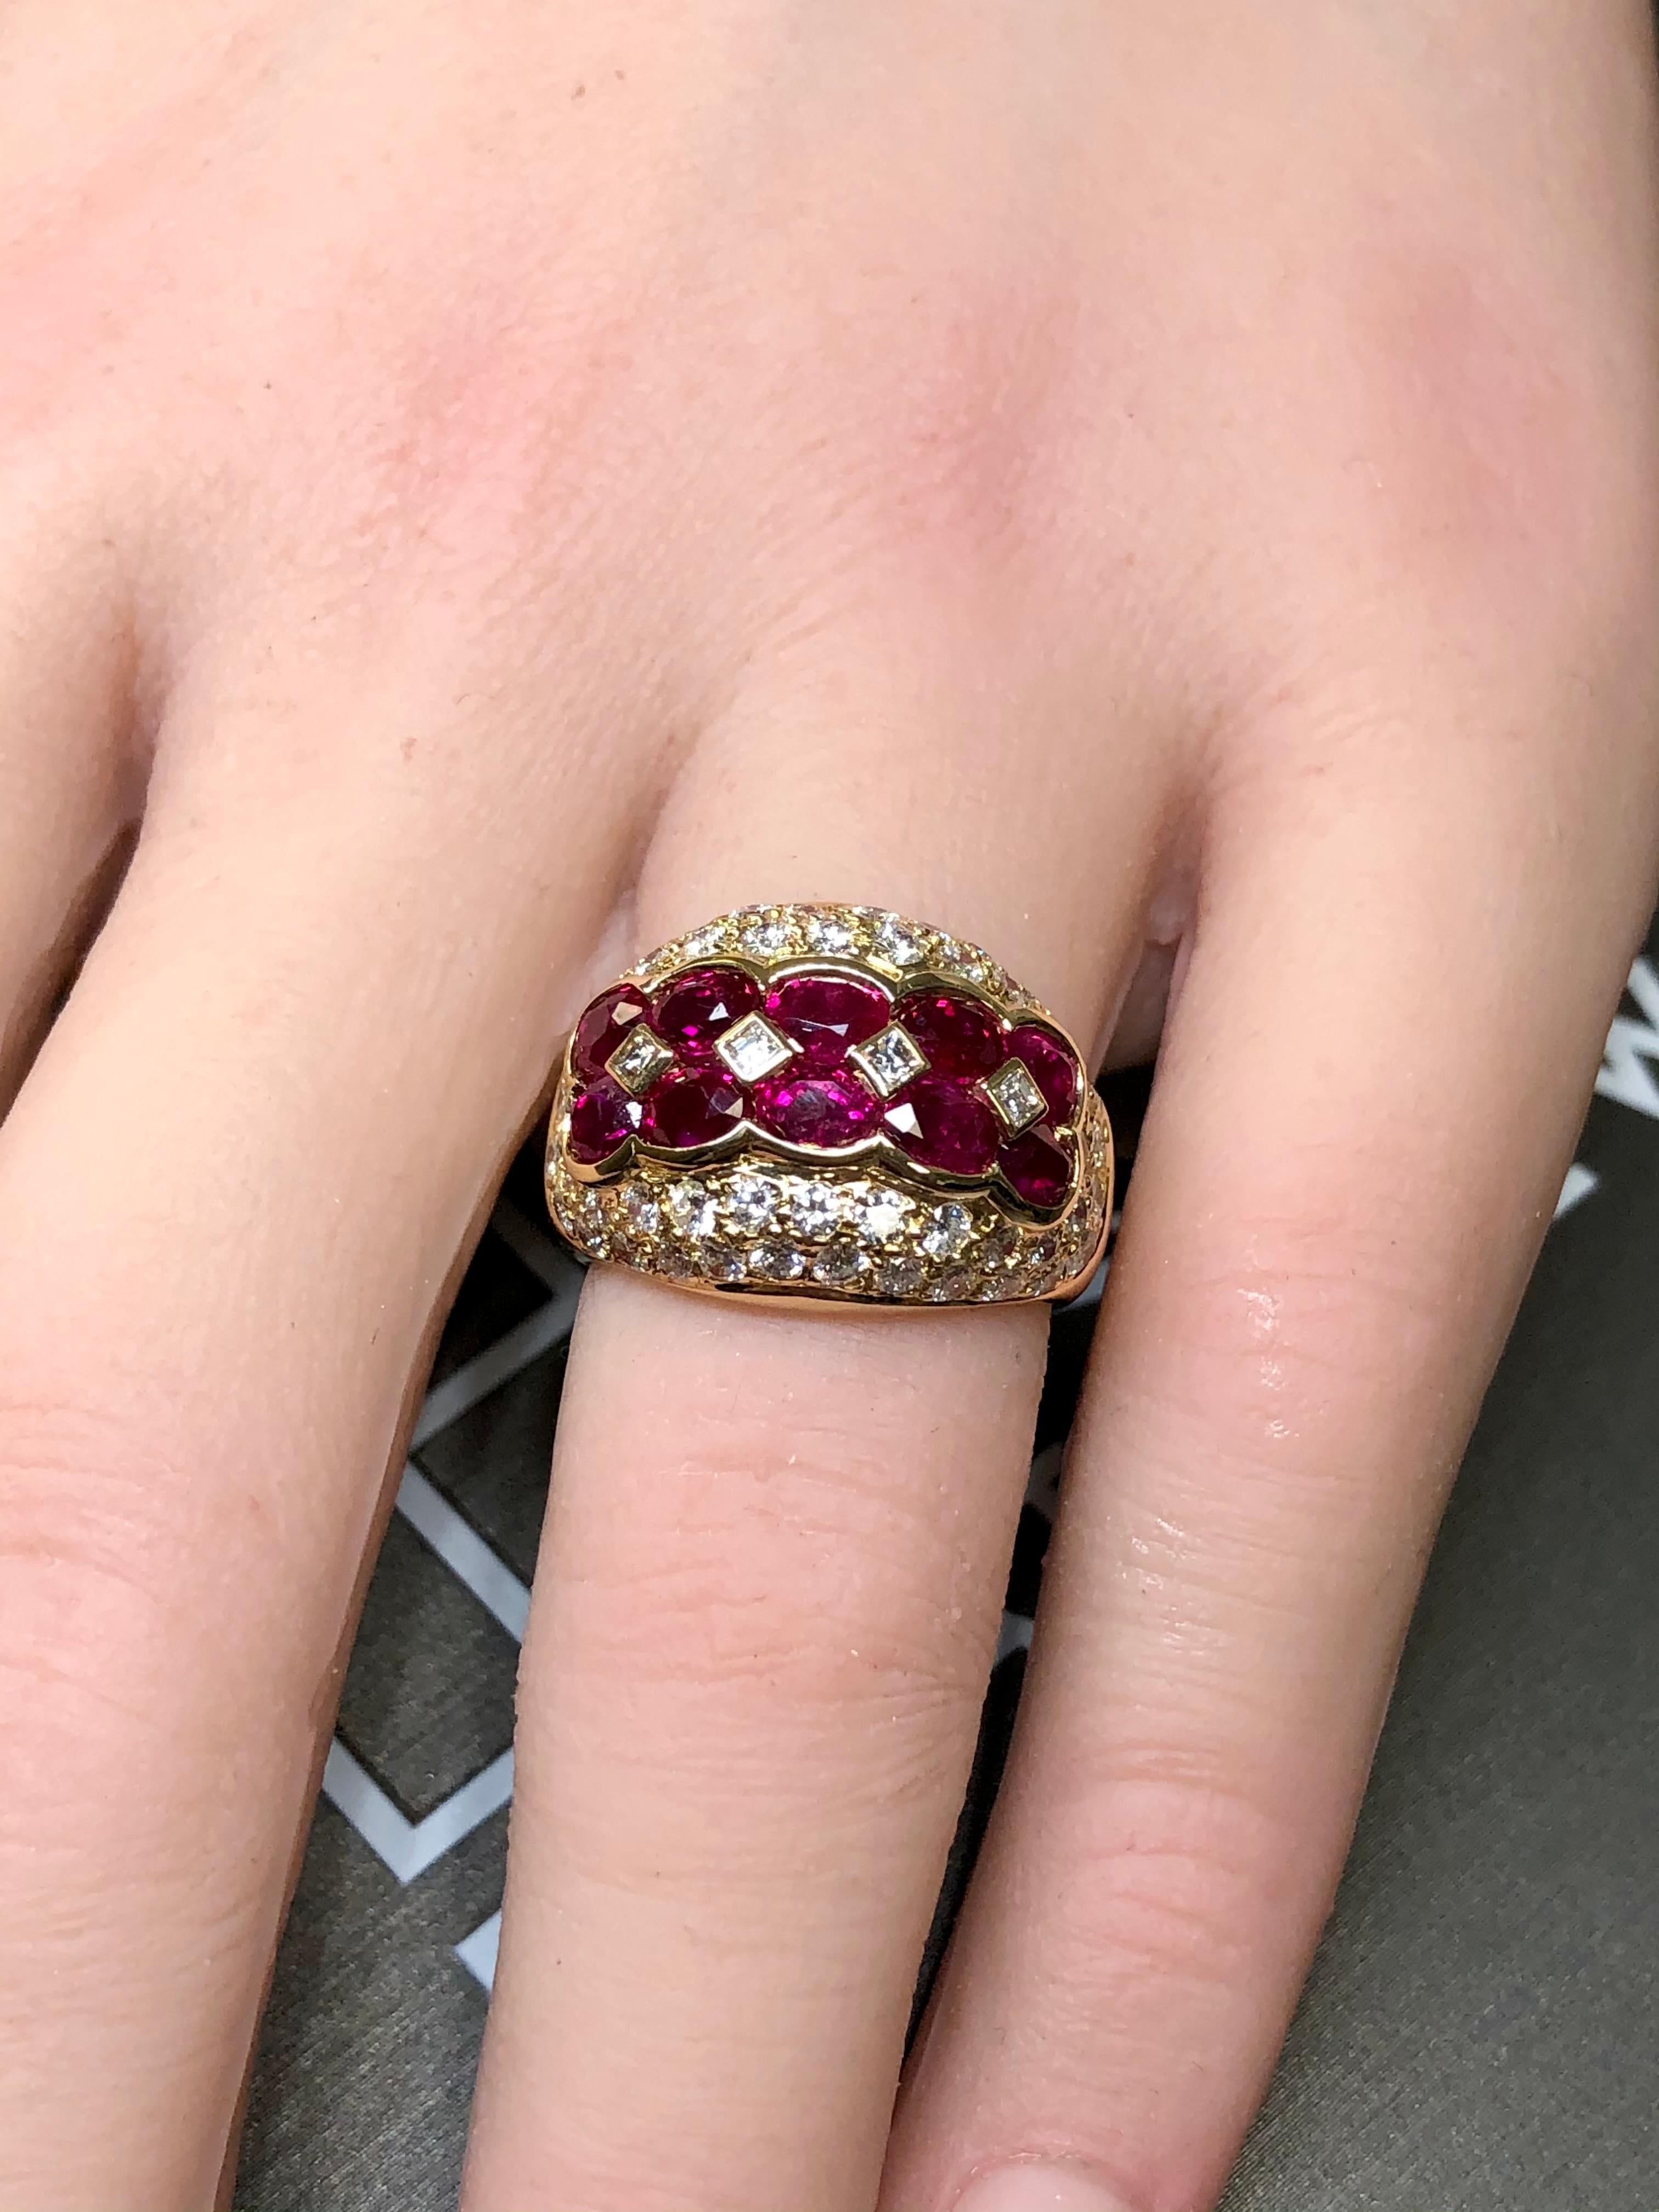 Estate 18K Yellow Gold Oval Ruby Pave Diamond Cocktail Ring 4.57cttw Sz 5.5 For Sale 4